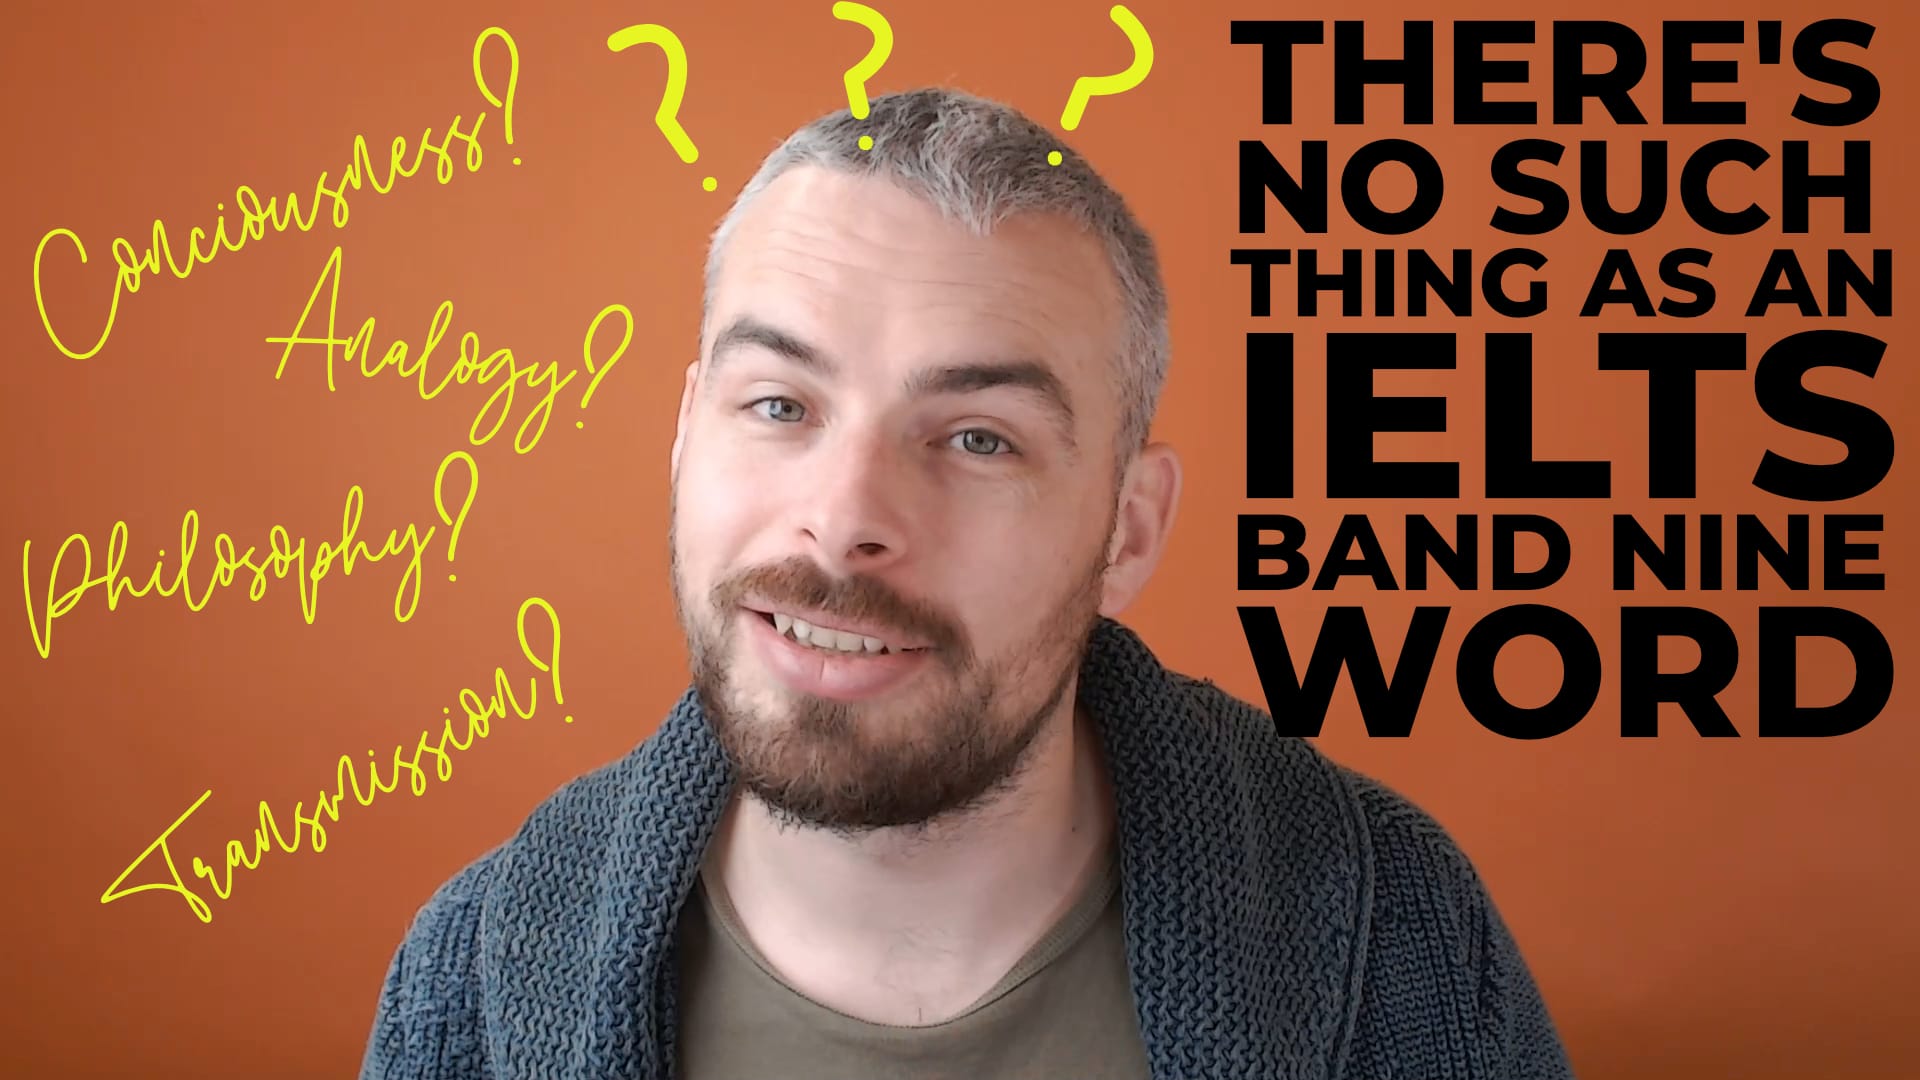 There's no such thing as an IELTS band nine word